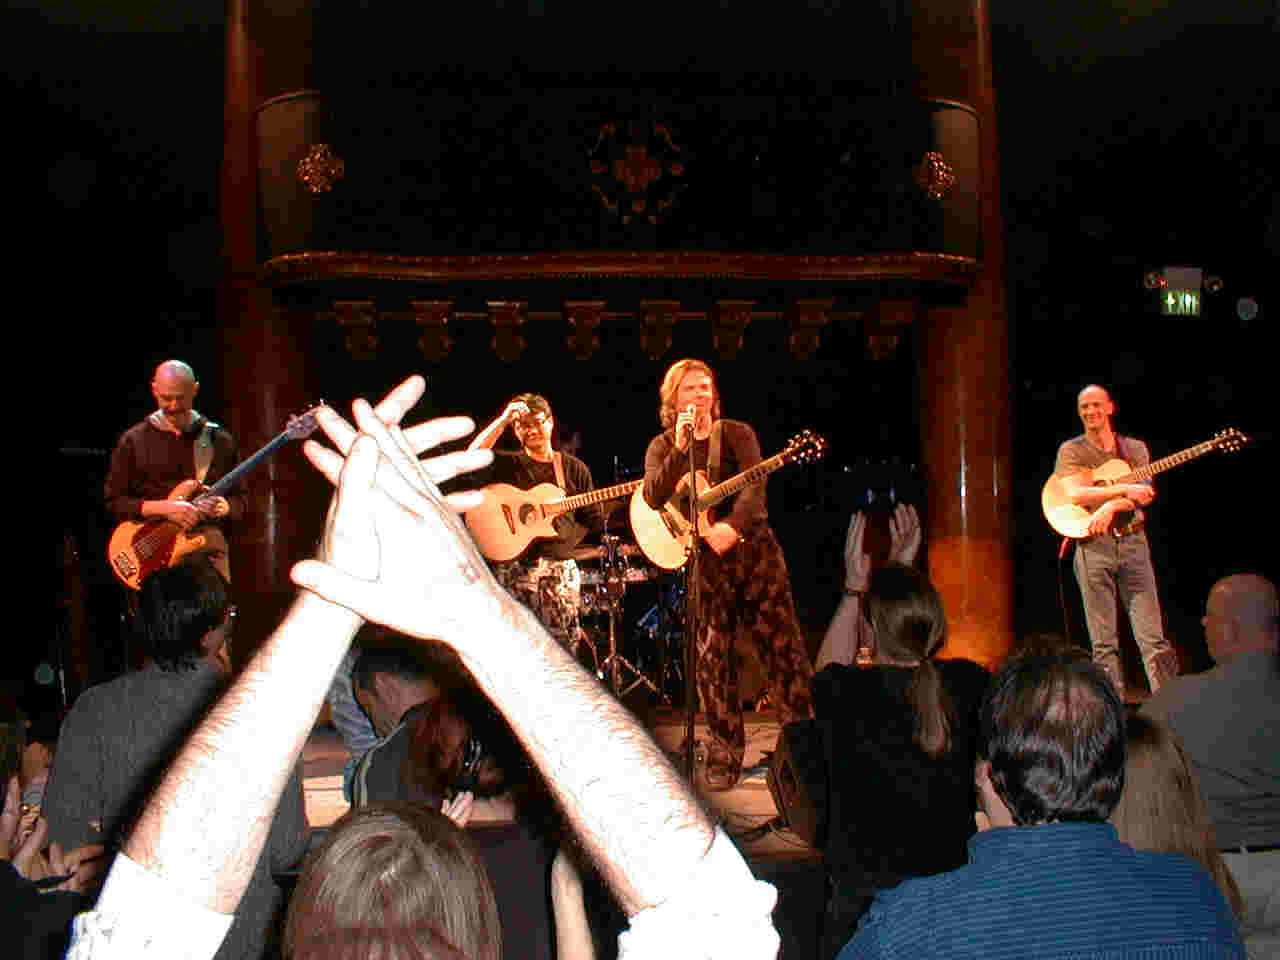 CGTLPM on stage at the Great American Music Hall